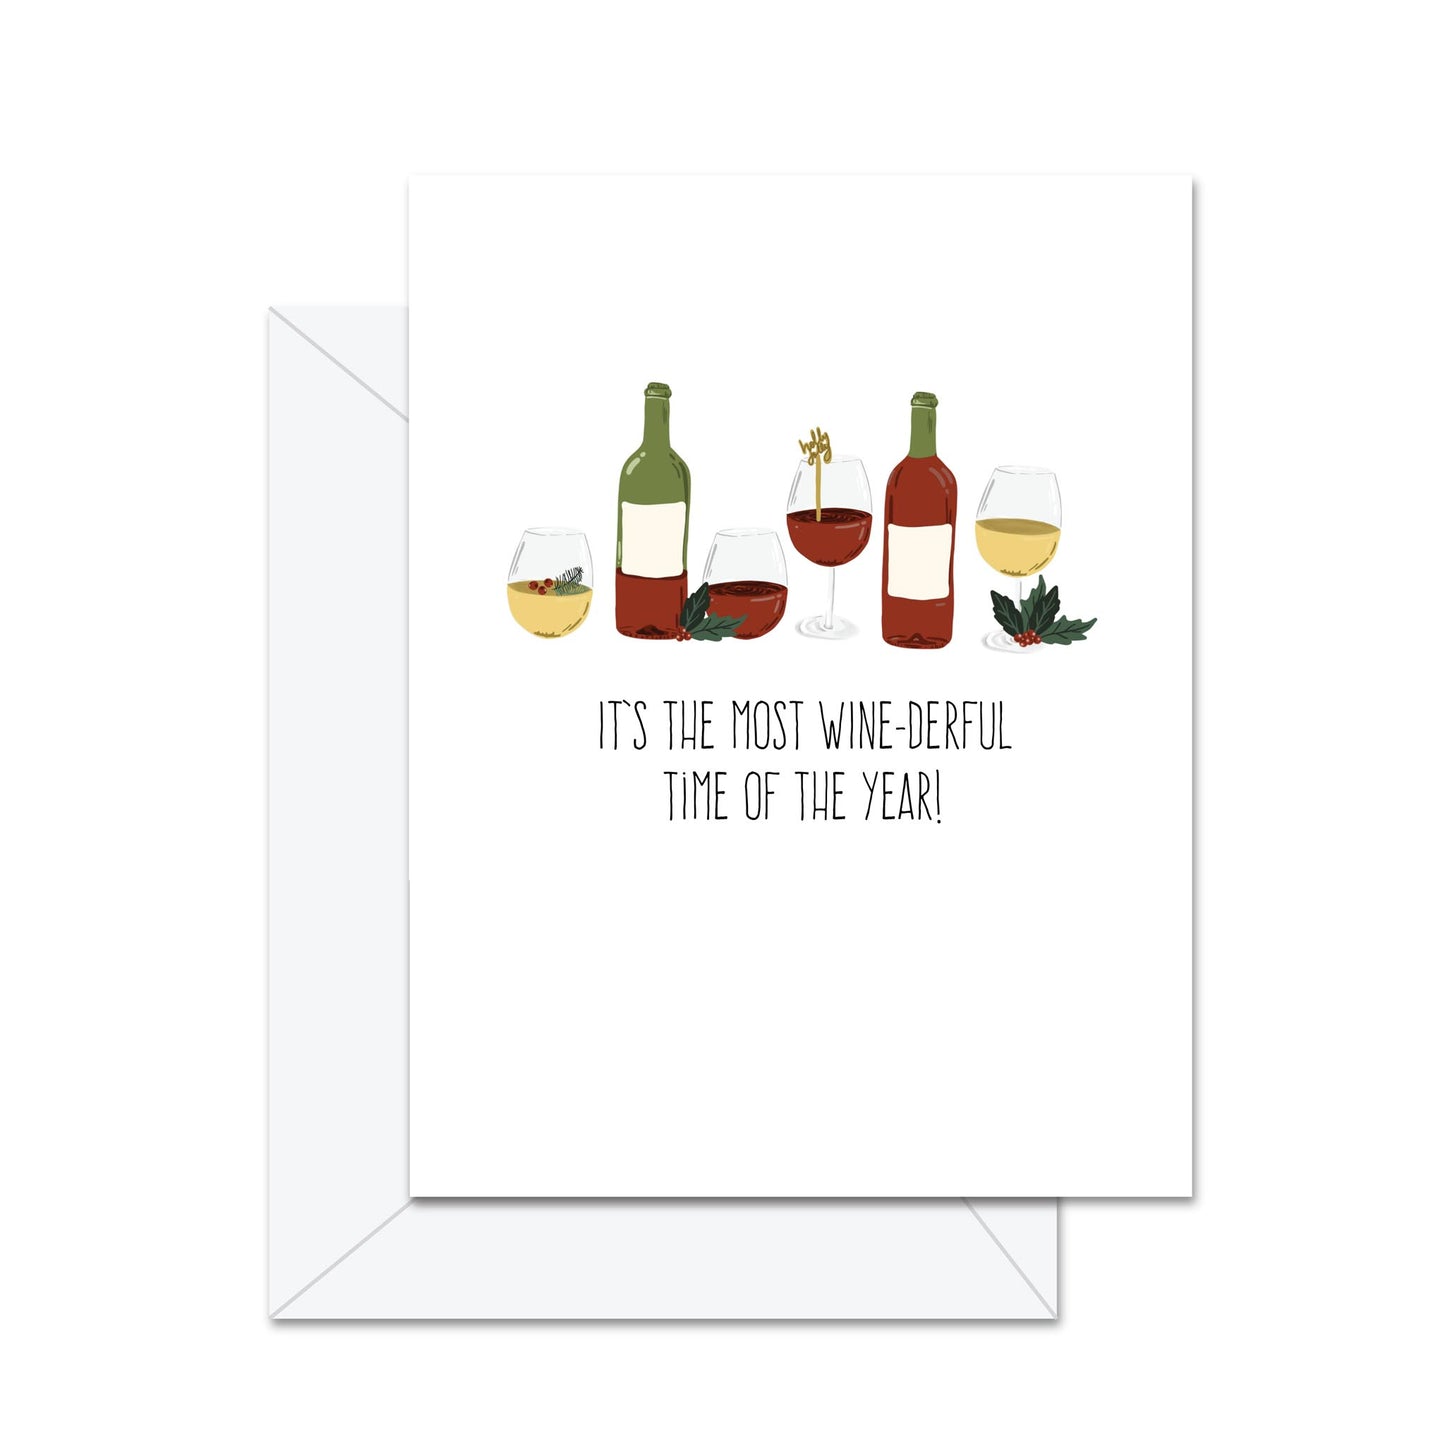 It's The Most Wine-Derful Time of The Year! - Greeting Card